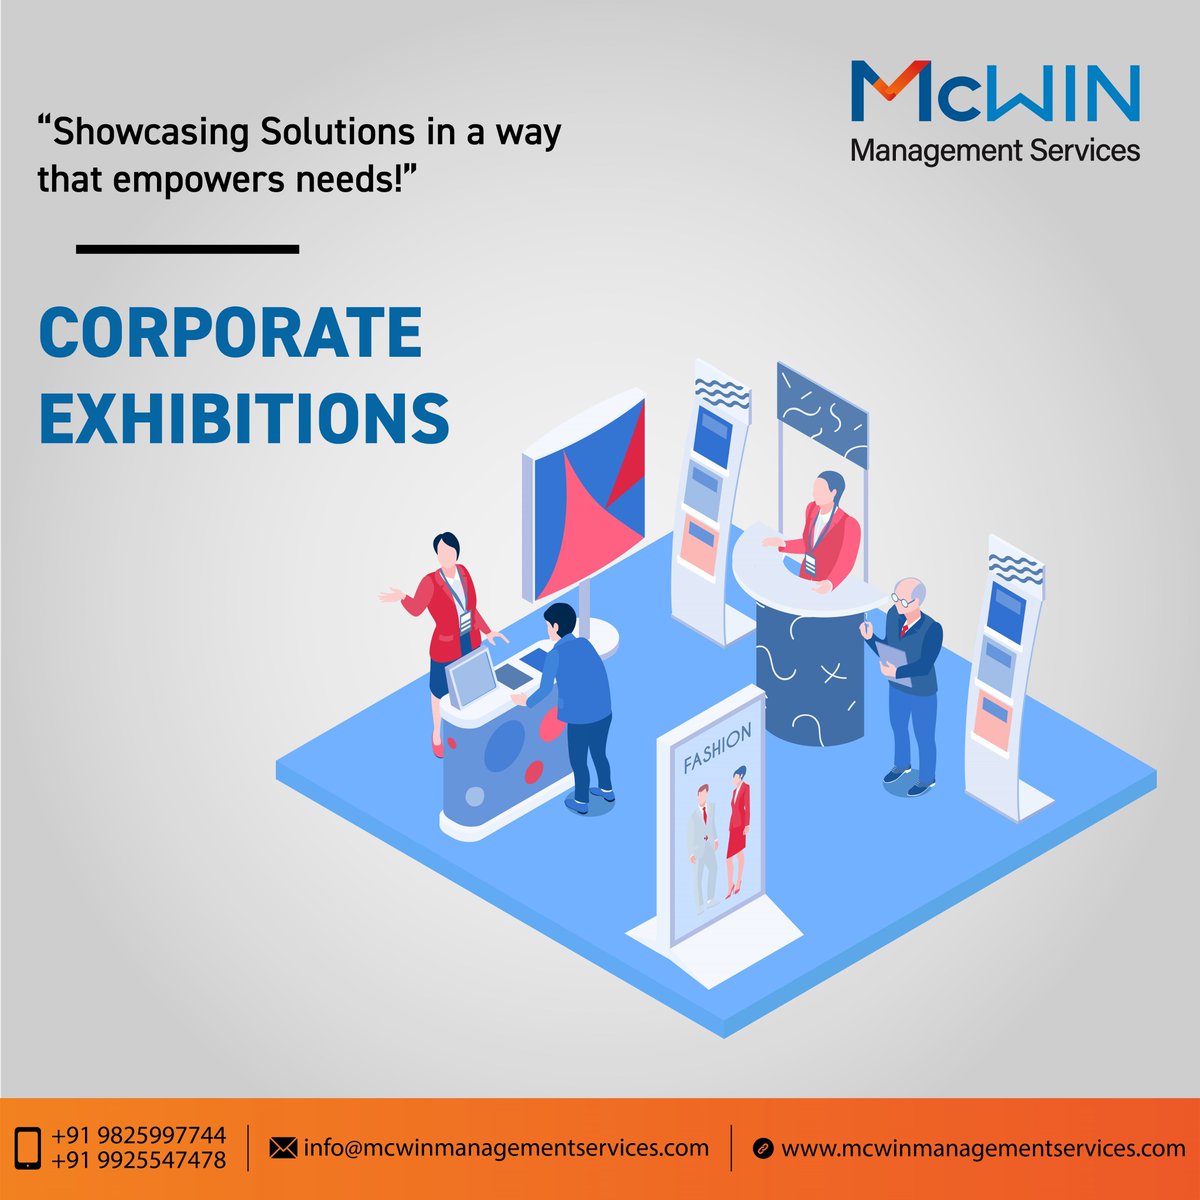 Adhere Our Well Oriented Exhibition Services for Better Impressions. We Comply & Use Our Years of Experience to Match Your High Standards !!
.
.
.
.
.
.
.
#McWIN
#ServicesToChoose
#Pre/postplanning
#Completexecution
#Stallfabrication
#Eventpromotions
#Conversionanalysis
#Muchmore